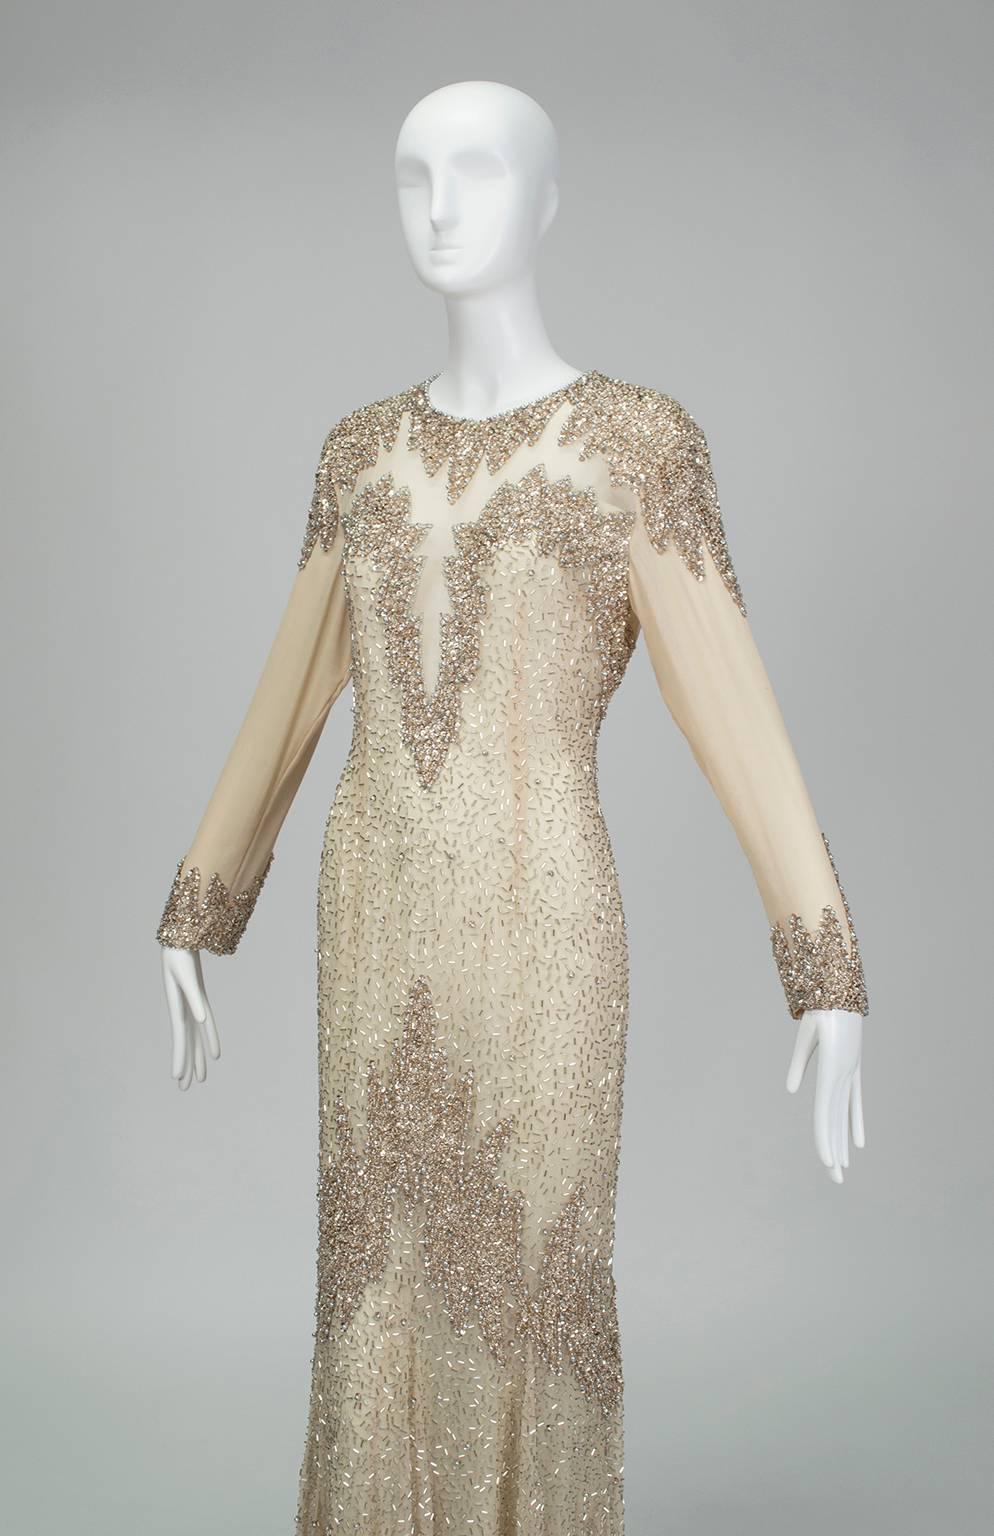 Oleg Cassini Nude Rose Gold Bead and Sequin Illusion Evening Gown - US 6, 1990s For Sale 1